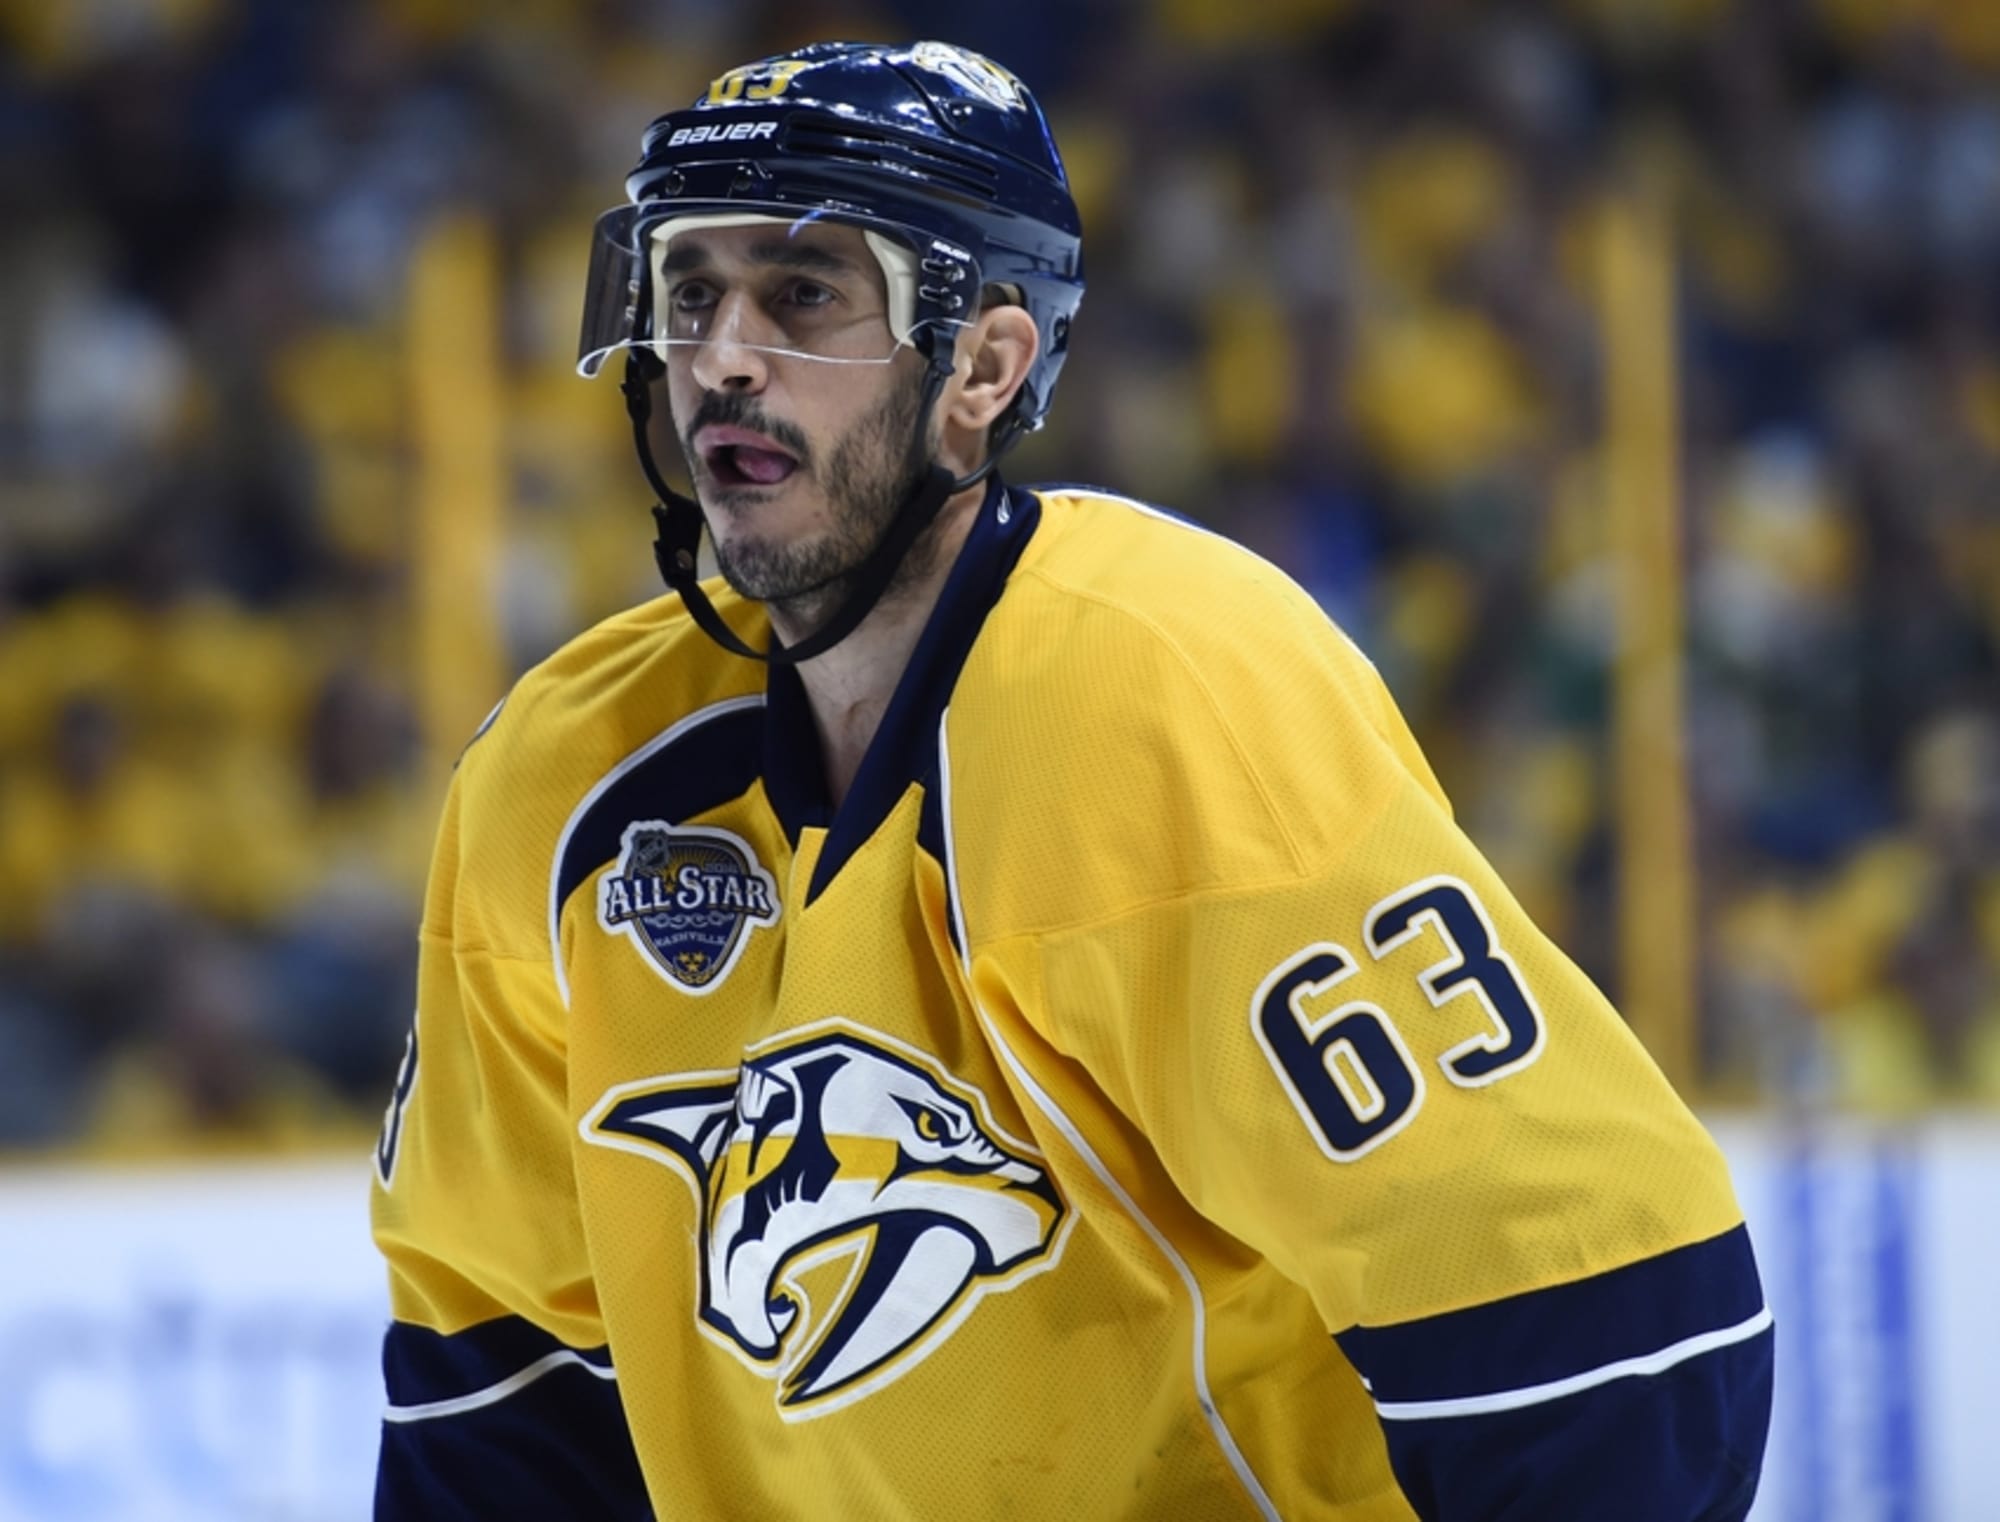 Nashville Predators center Mike Ribeiro wears a Military Appreciation jersey  as he tosses a puck into the crowd while warming up before an NHL hockey  game against the Minnesota Wild on Saturday